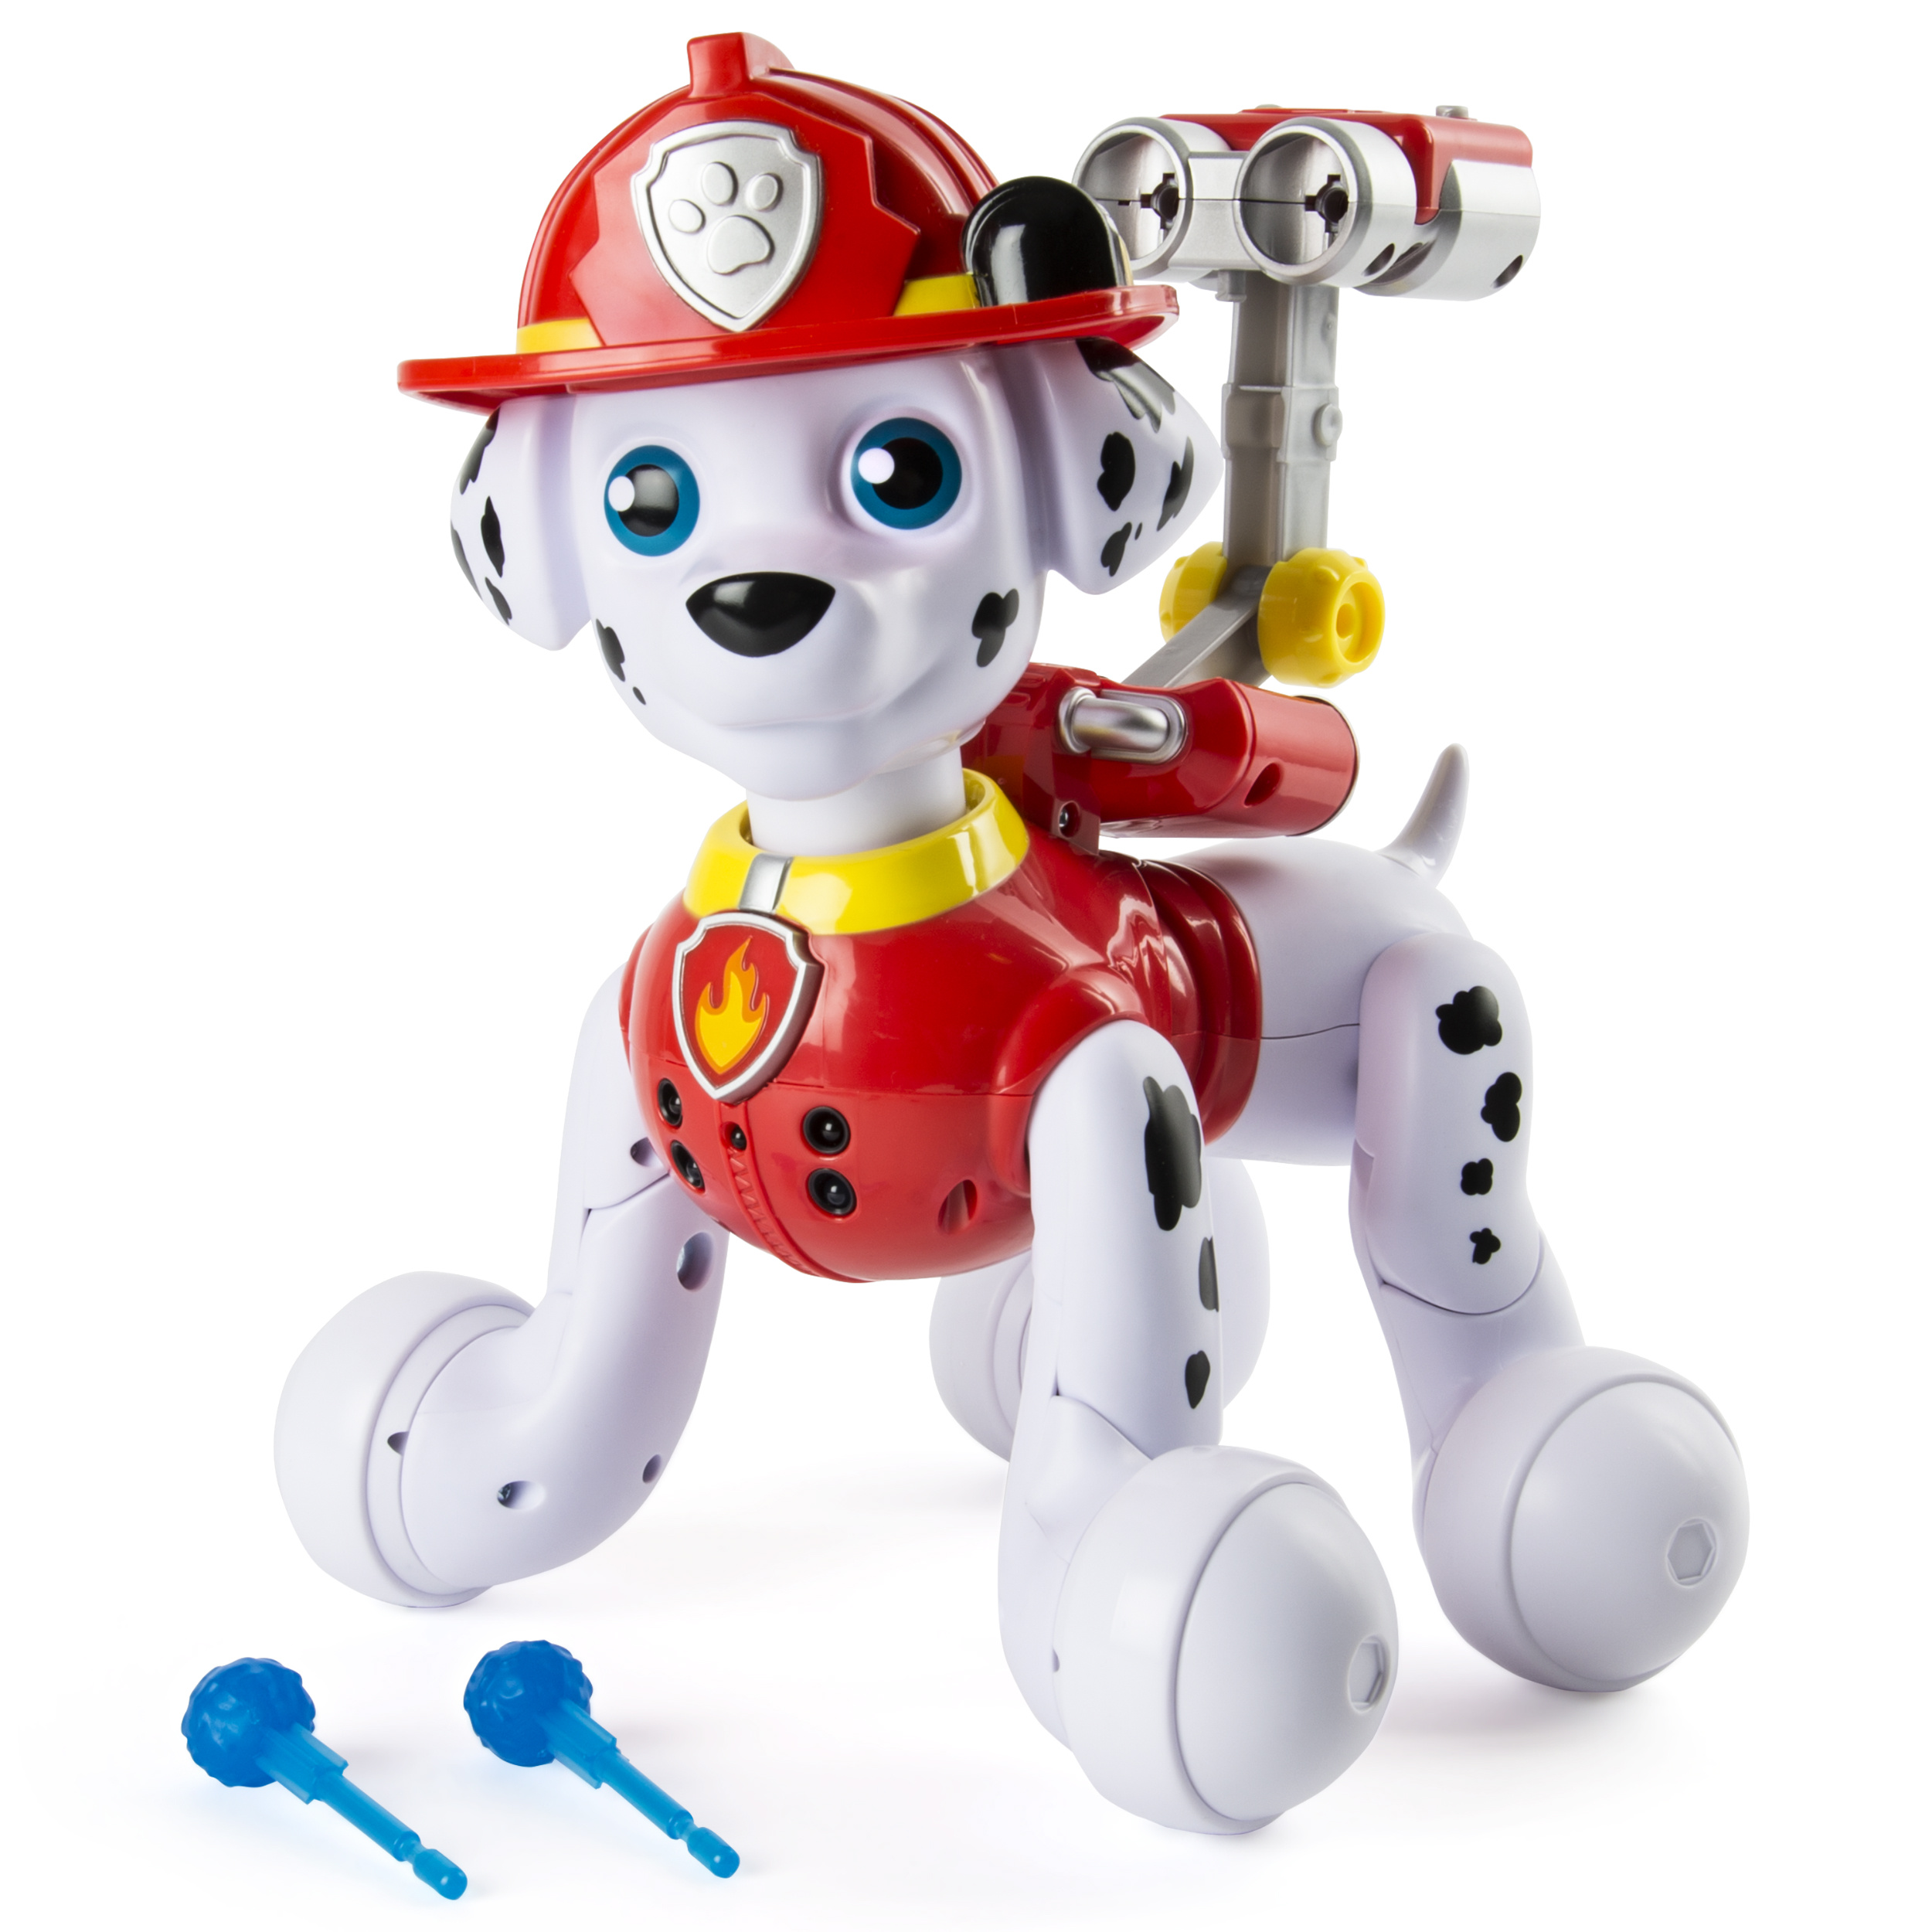 Paw Patrol, Zoomer Marshall, Interactive Pup with Missions, Sounds and Phrases, by Spin Master - image 1 of 8